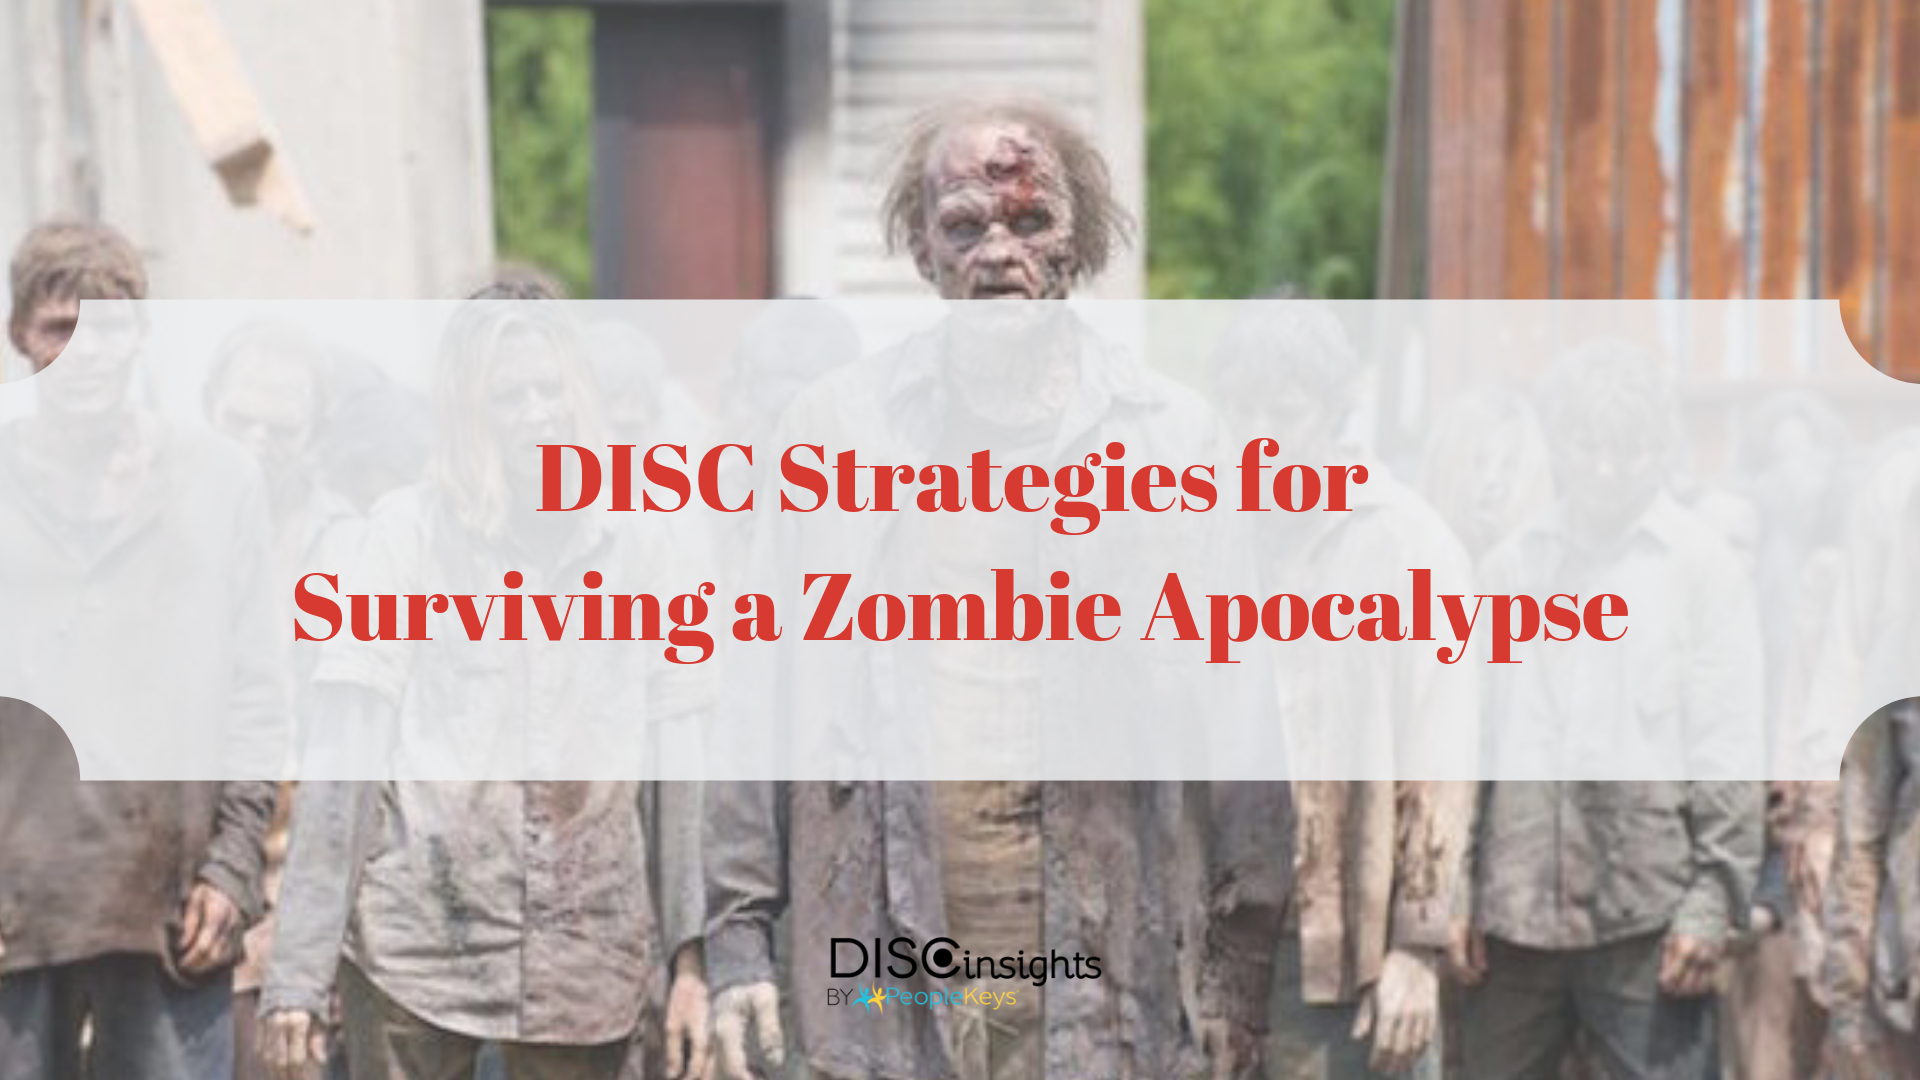 DISC Strategies for Surviving a Zombie Apocalypse